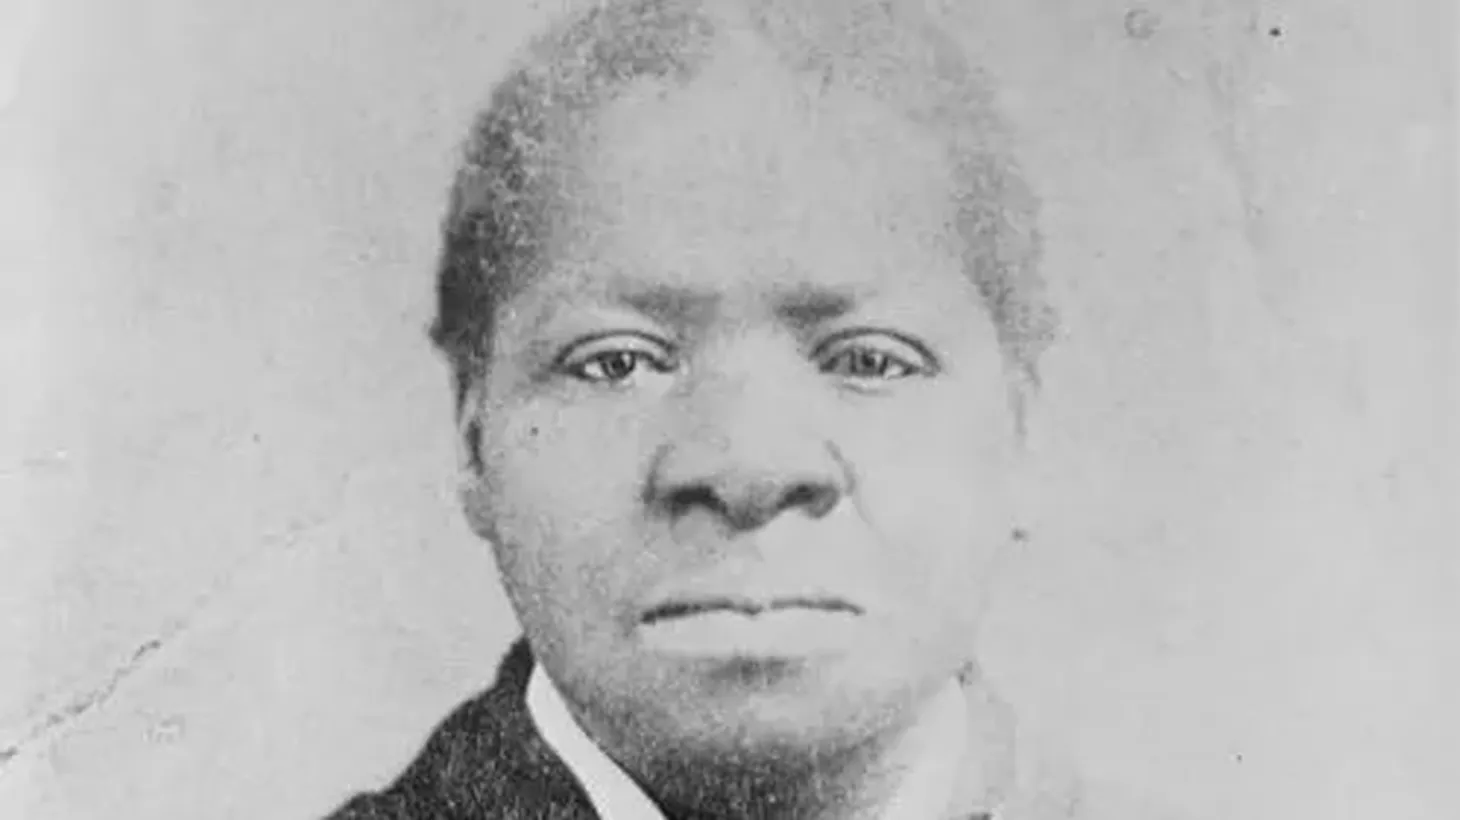 Biddy Mason was born enslaved in the southern U.S., was moved to California by a plantation owner, and later won her freedom. She bought prime real estate in what’s now downtown LA, became immensely wealthy, and helped many Angelenos.